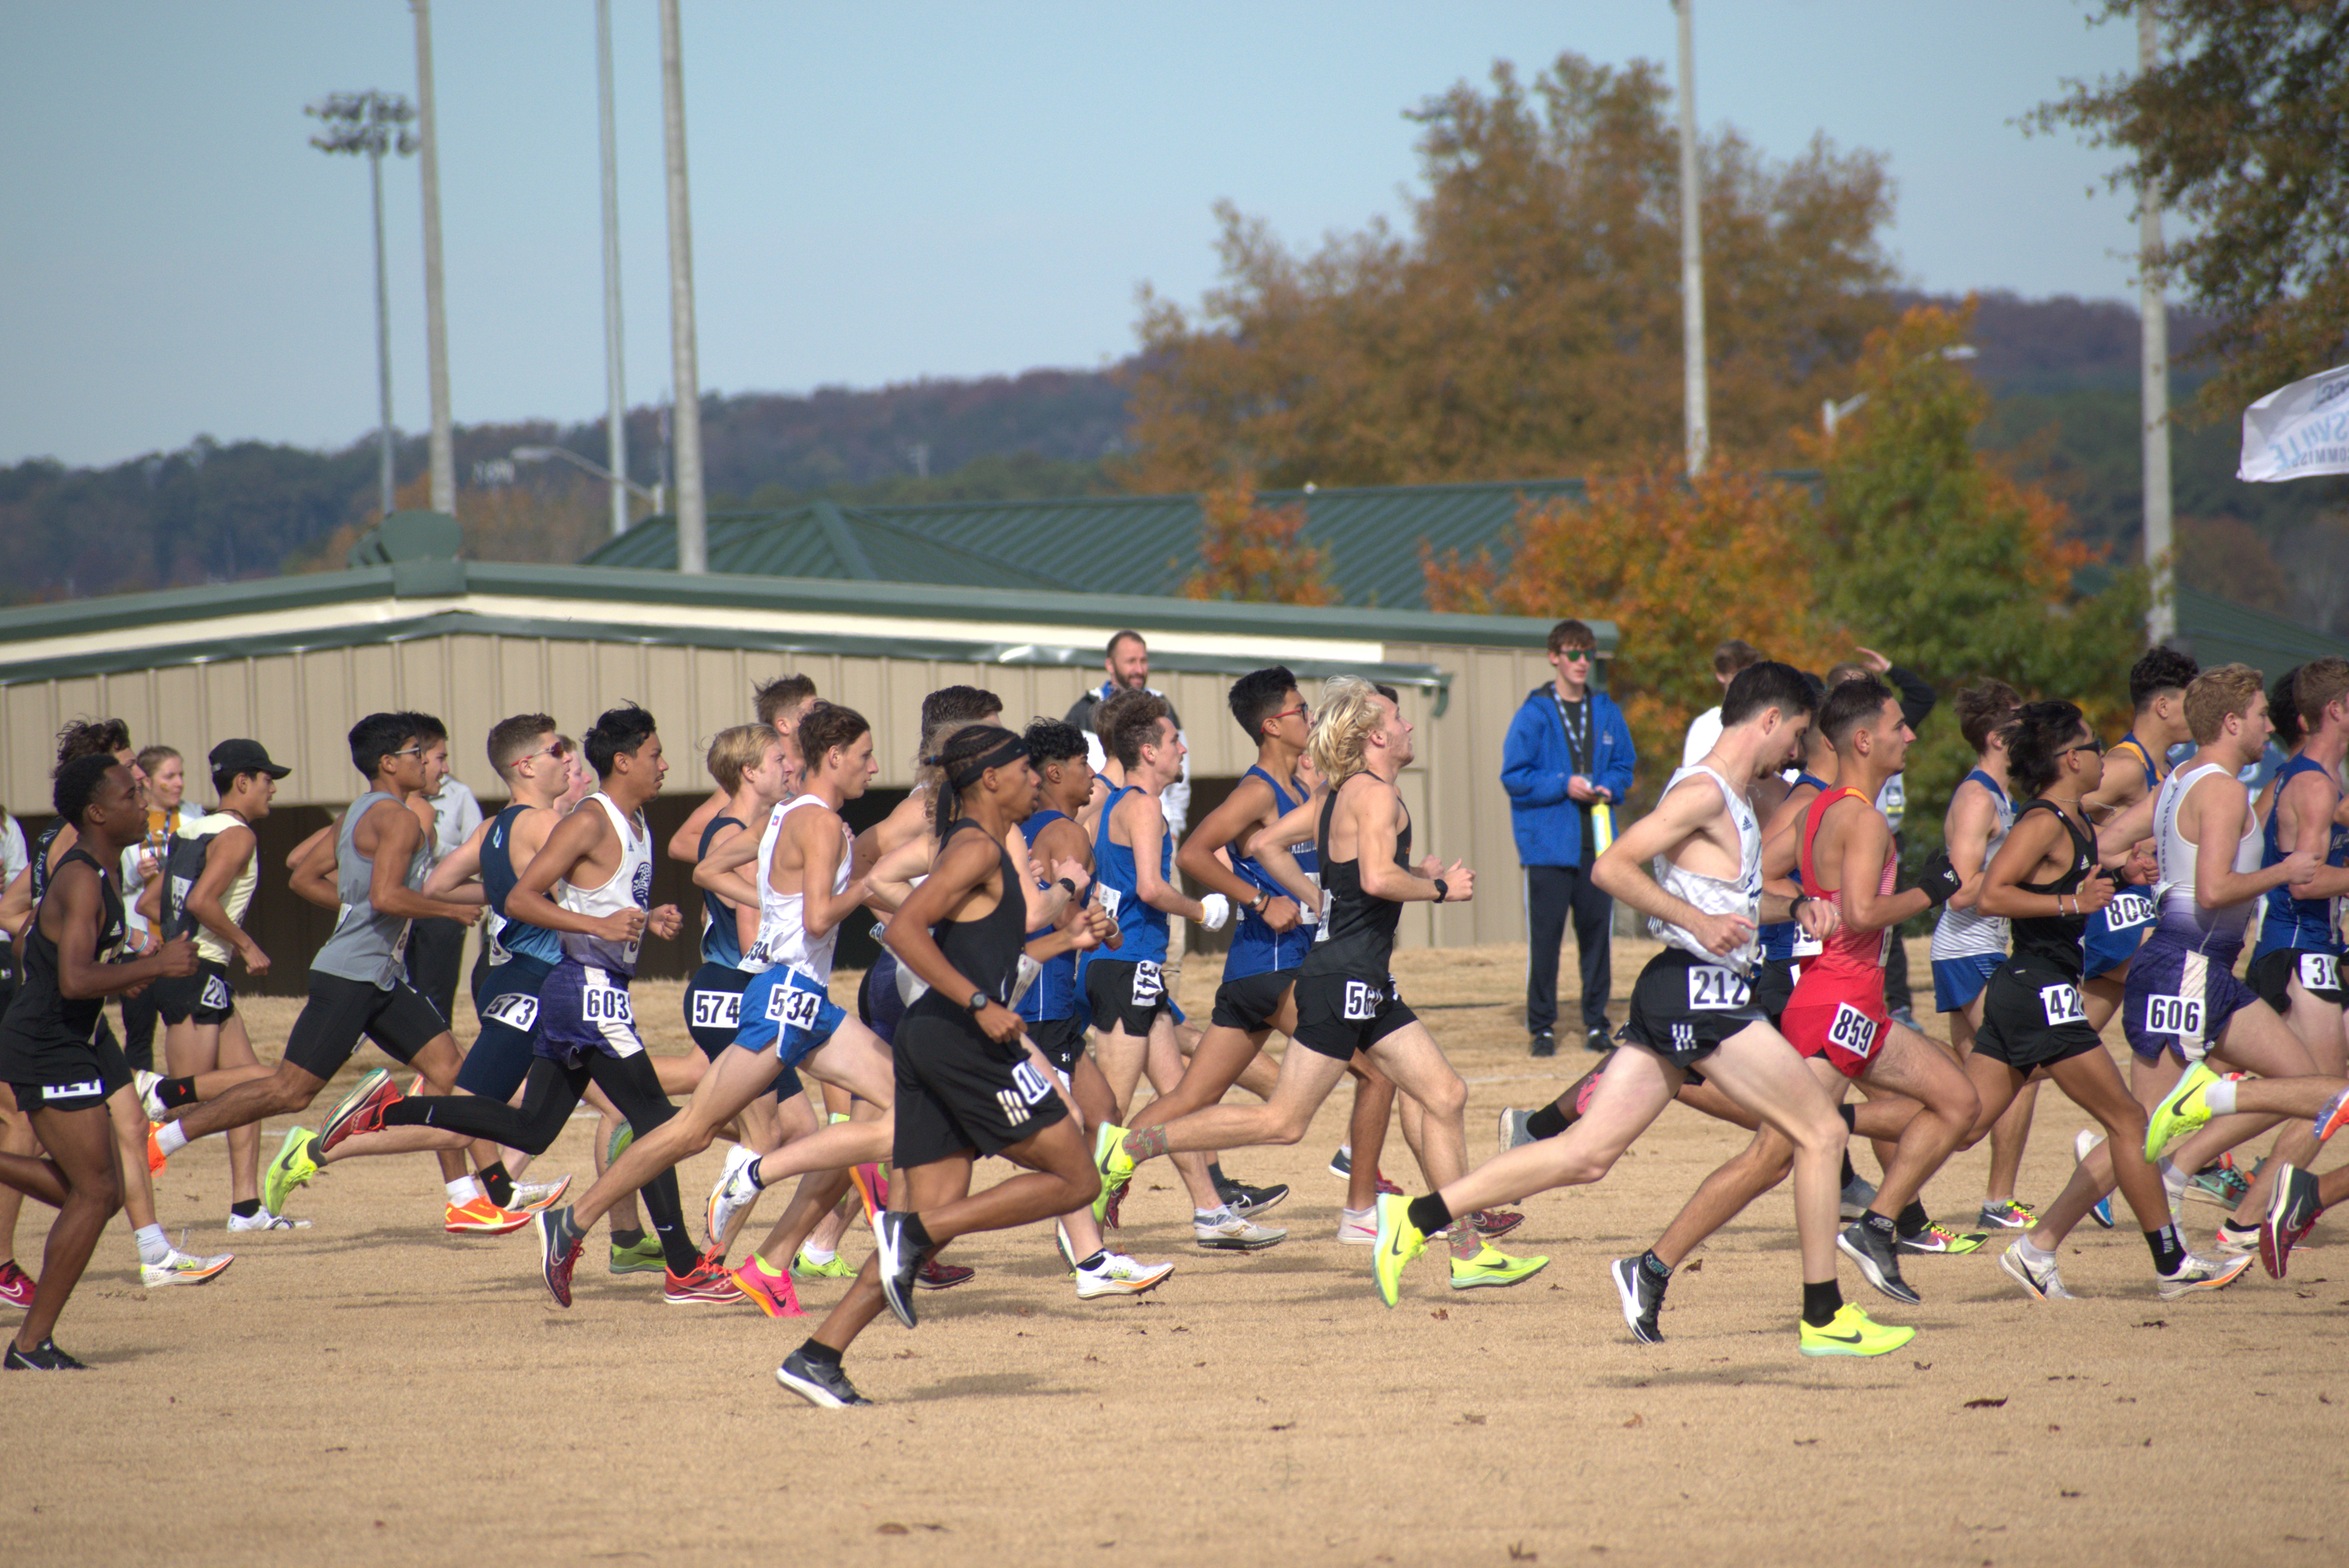 The Ranger College Men's Cross Country team complete an outstanding season